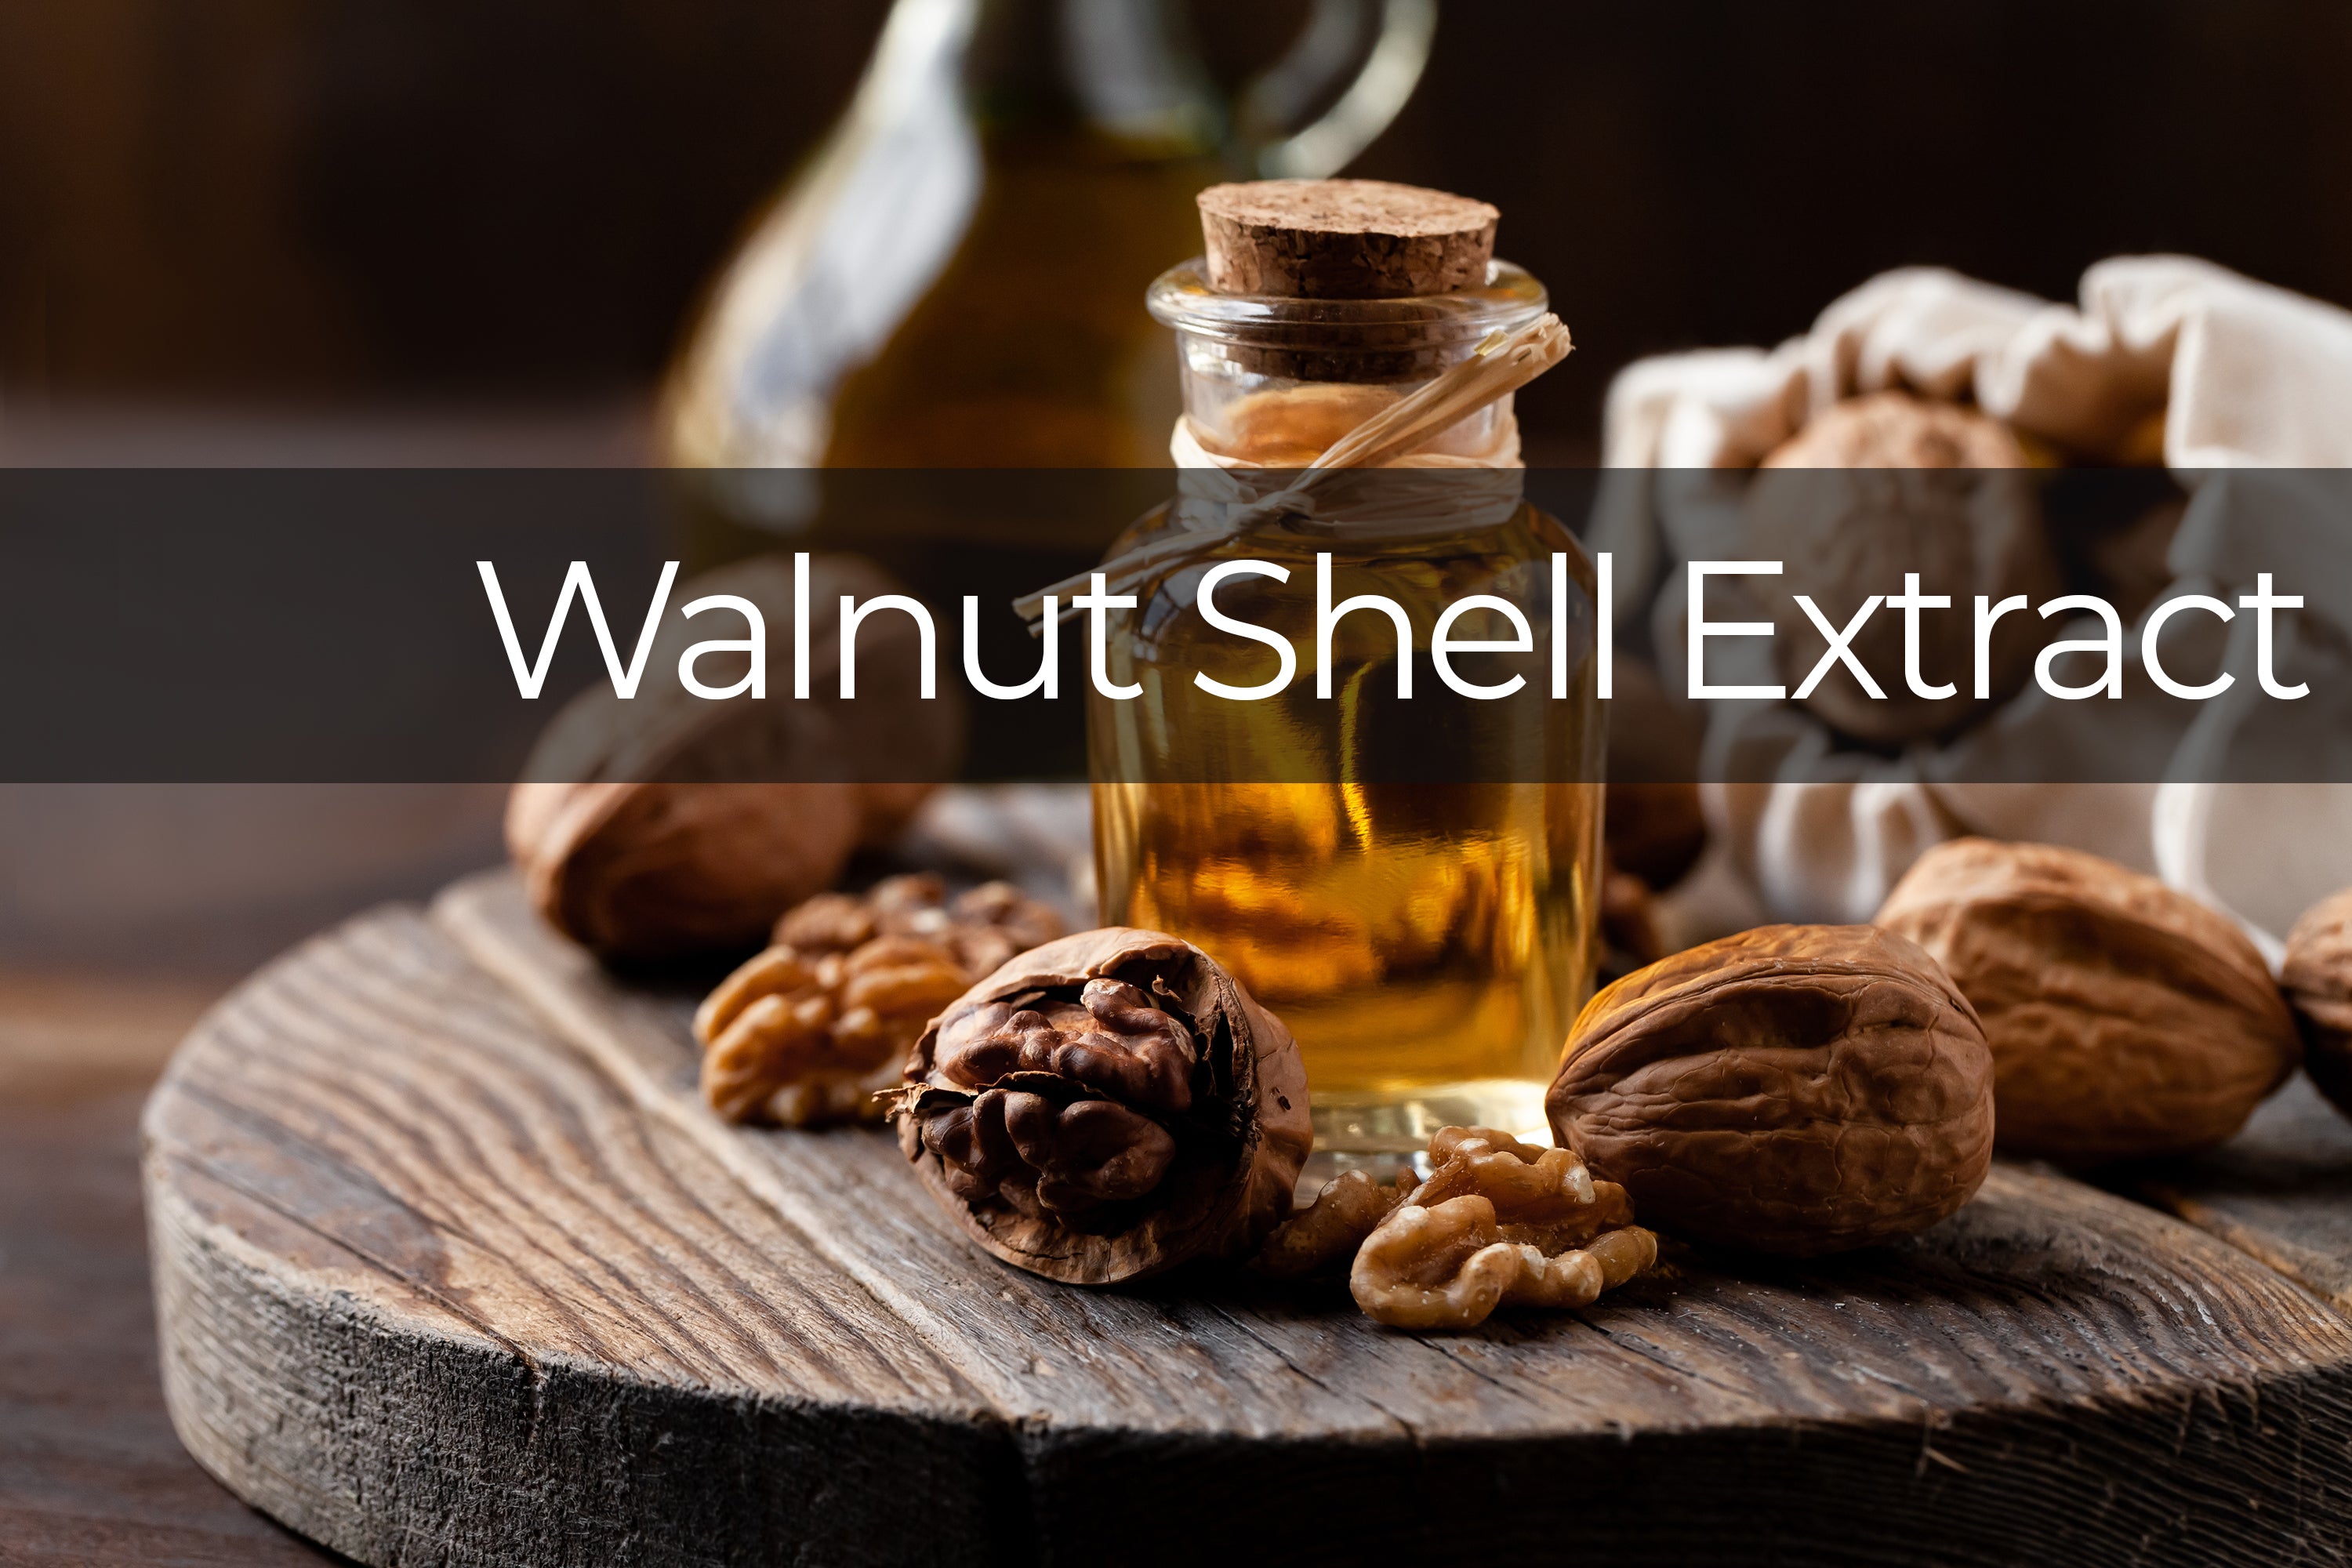 Prismax Ingredient: Walnut Shell Extract